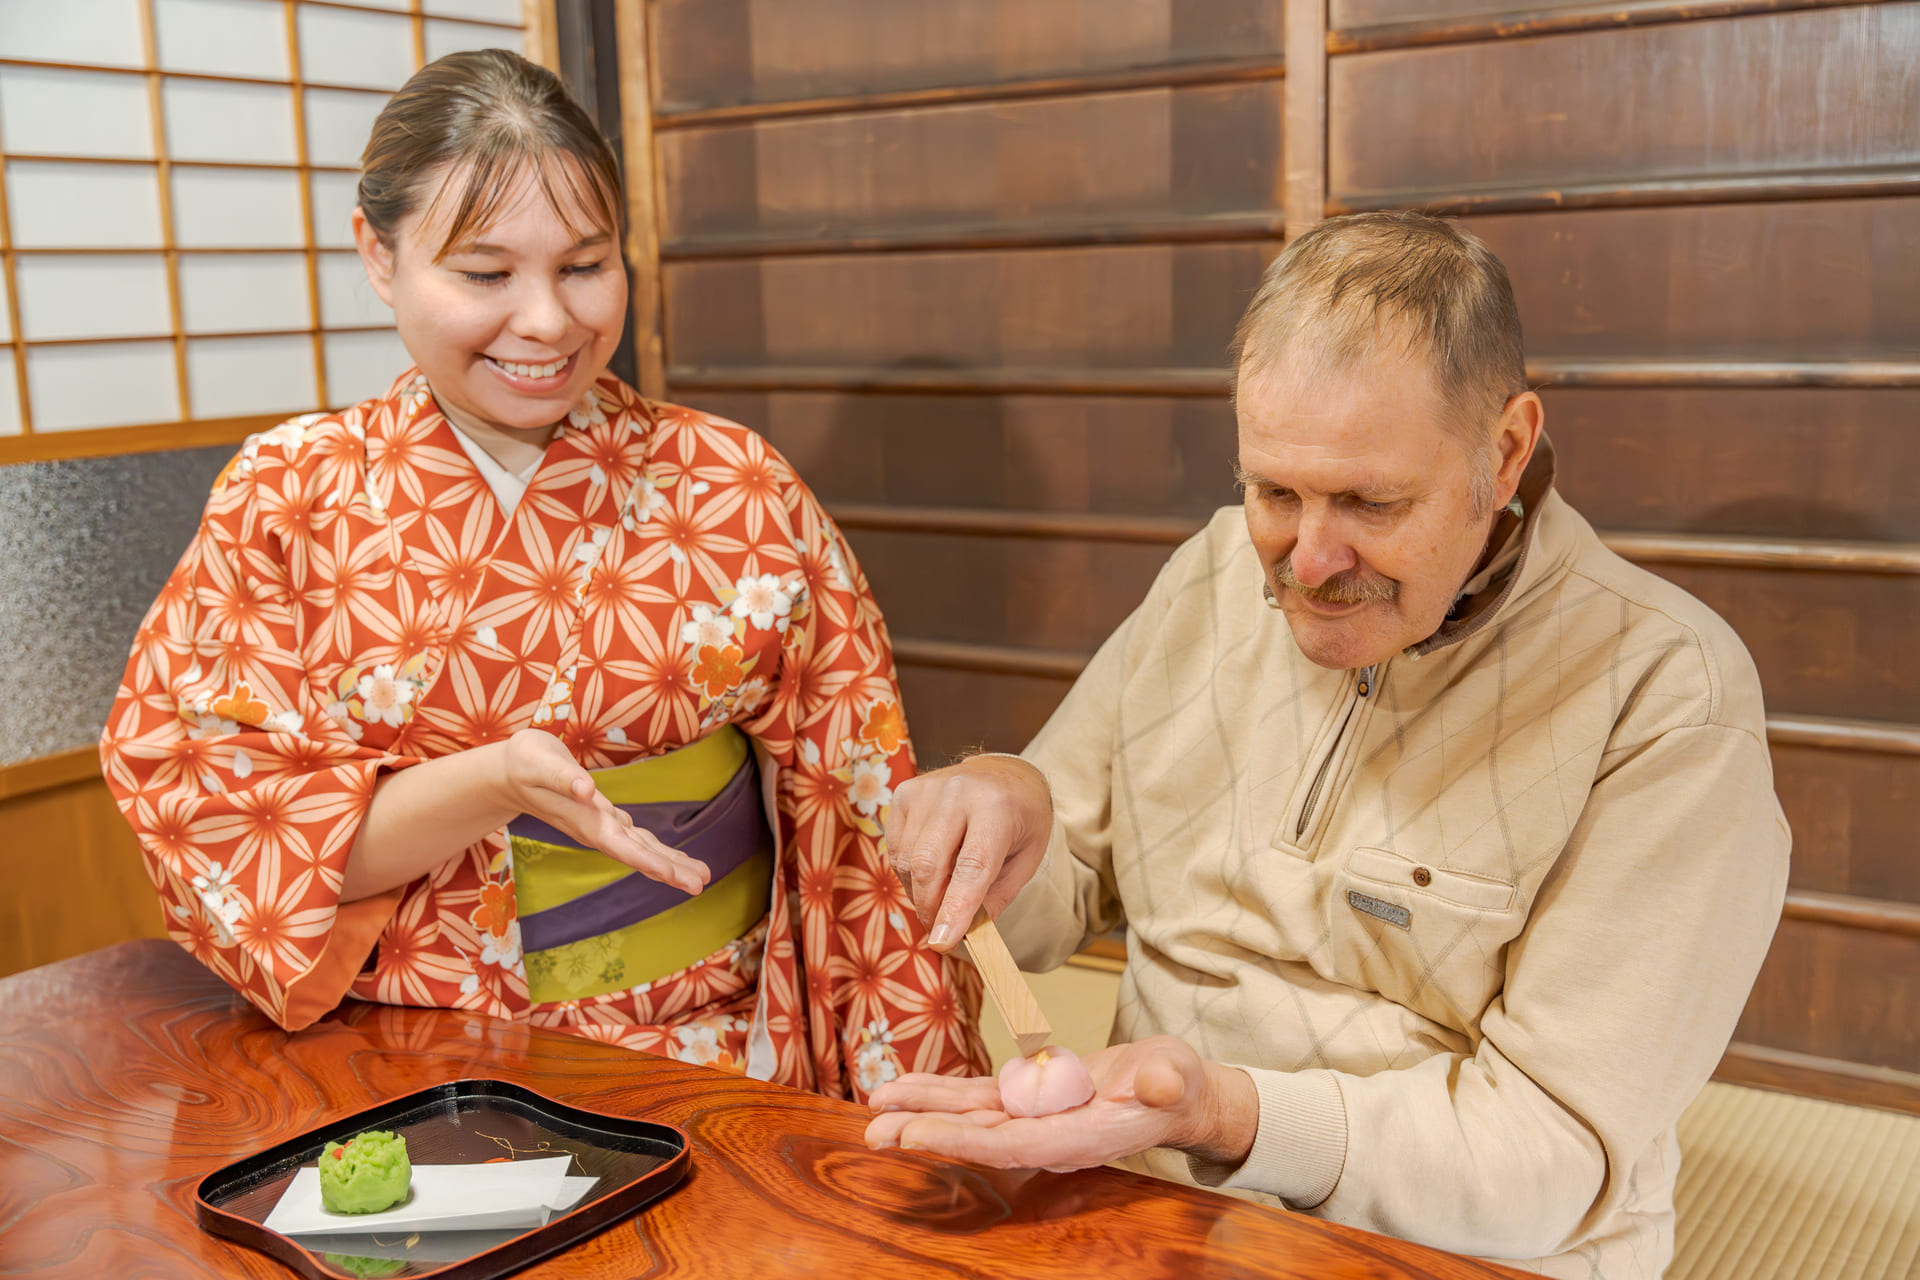 Japanese Cultural Experiences at Kyoto Abeya. A woman in a kimono and a man in a sweater are at a wooden table, with the woman teaching the man how to wrap a Japanese wagashi sweet with a bamboo leaf.